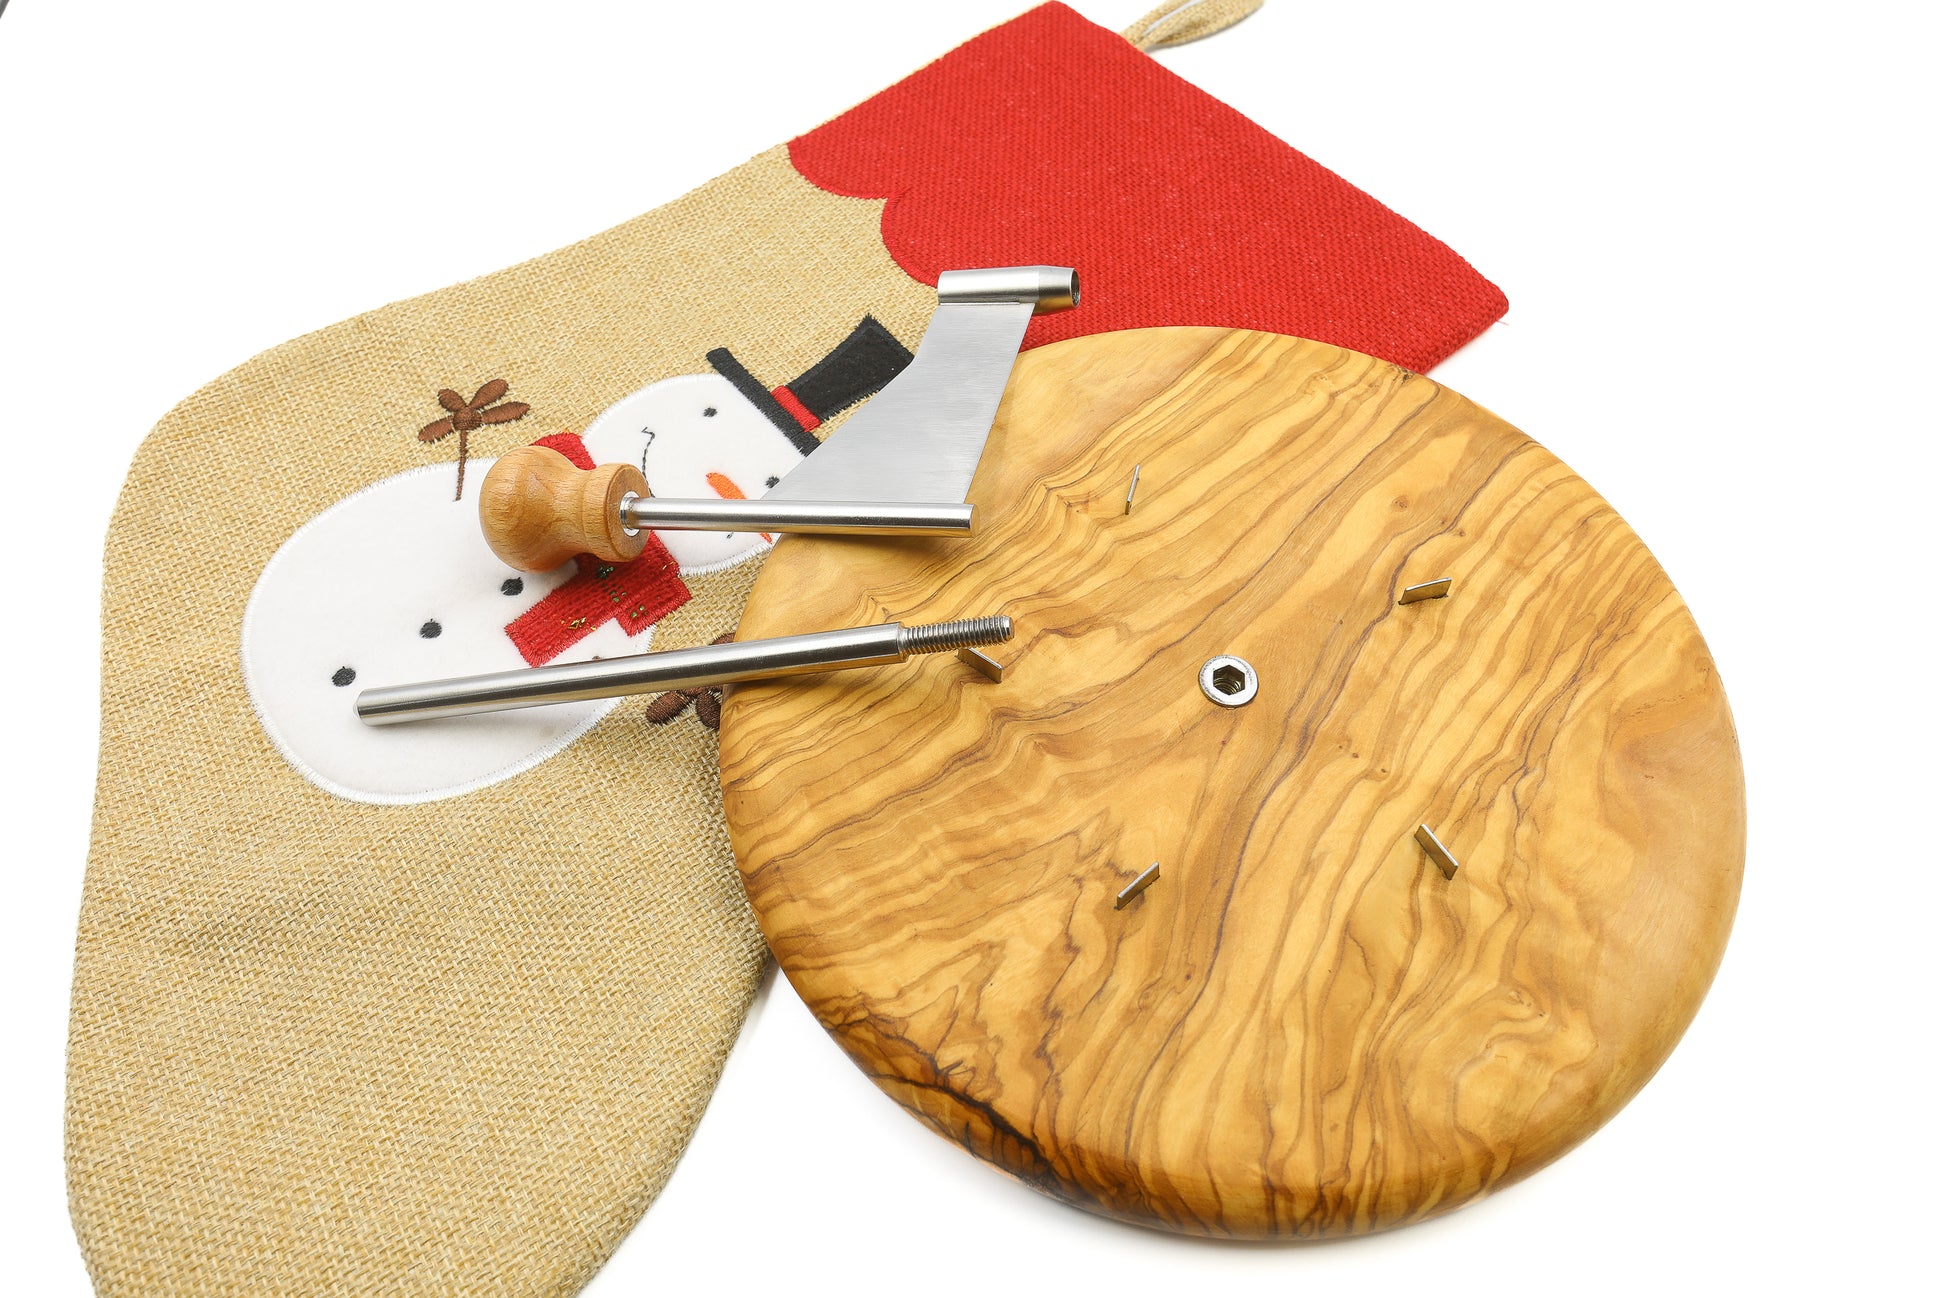 Rustic olive wood cheese board with a stainless steel platter and cheese shaver, perfect for your cheese selection